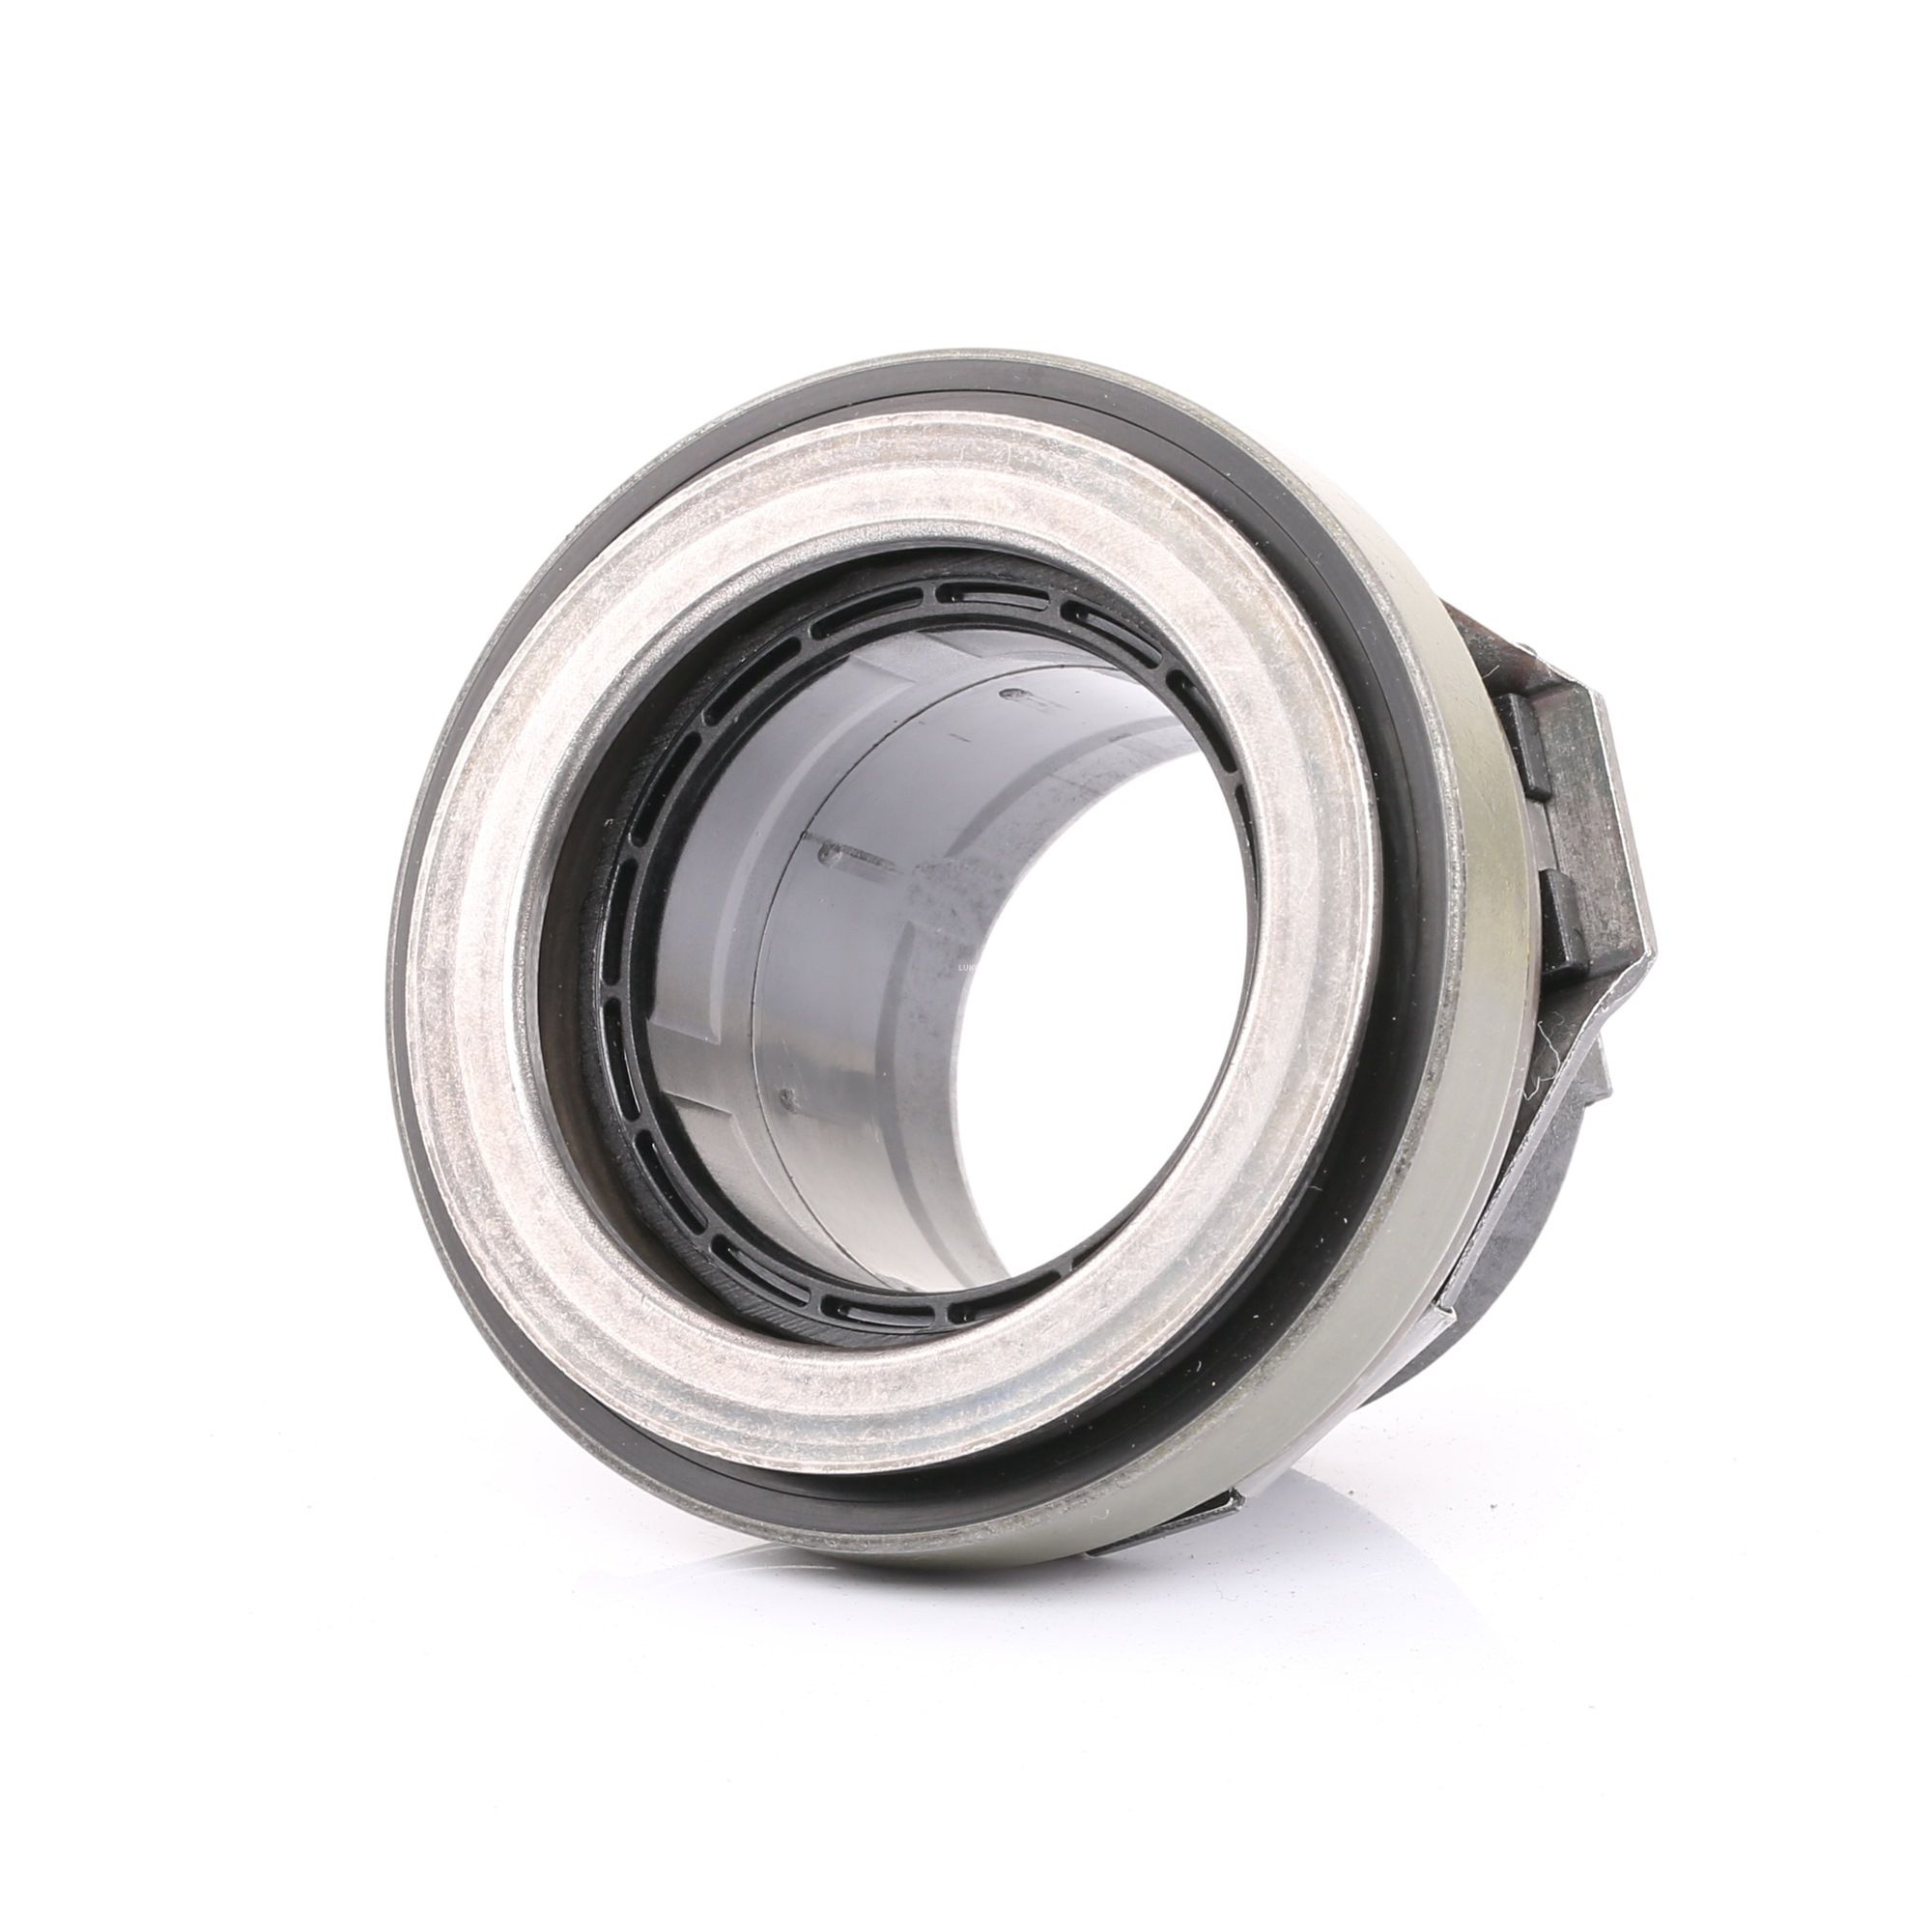 Image of LuK Clutch Release Bearing BMW,BERTONE,ALPINA 500 0035 10 1204419,12044194,1207275 Clutch Bearing,Release Bearing,Releaser 1208423,1223168,1223366